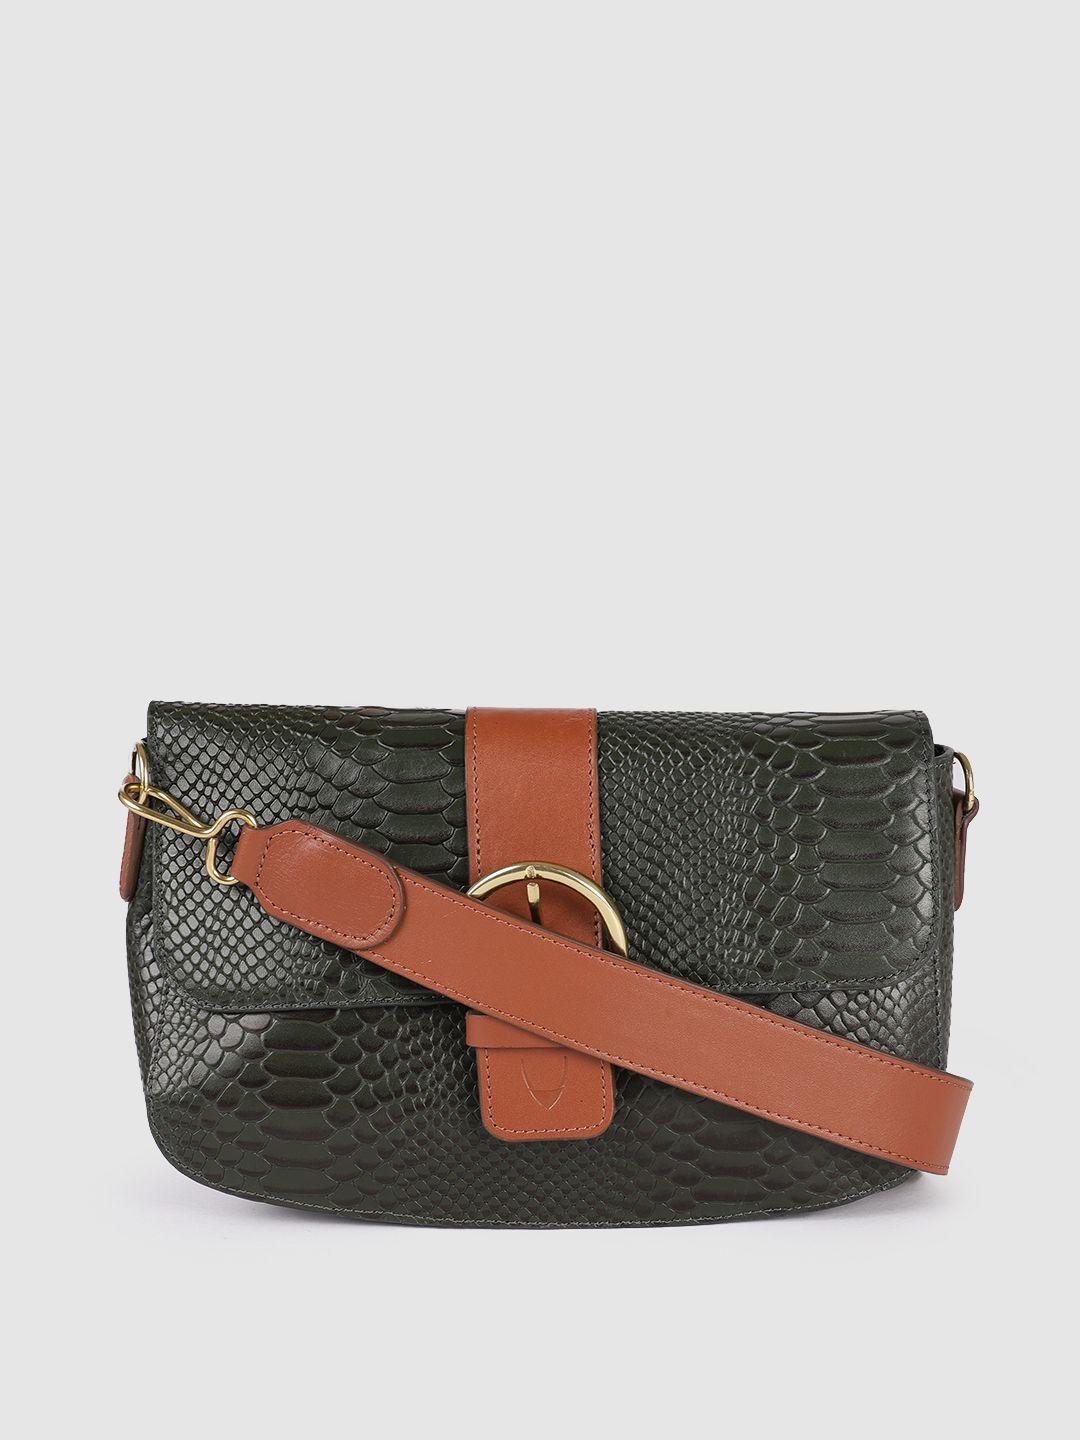 hidesign green textured leather structured sling bag